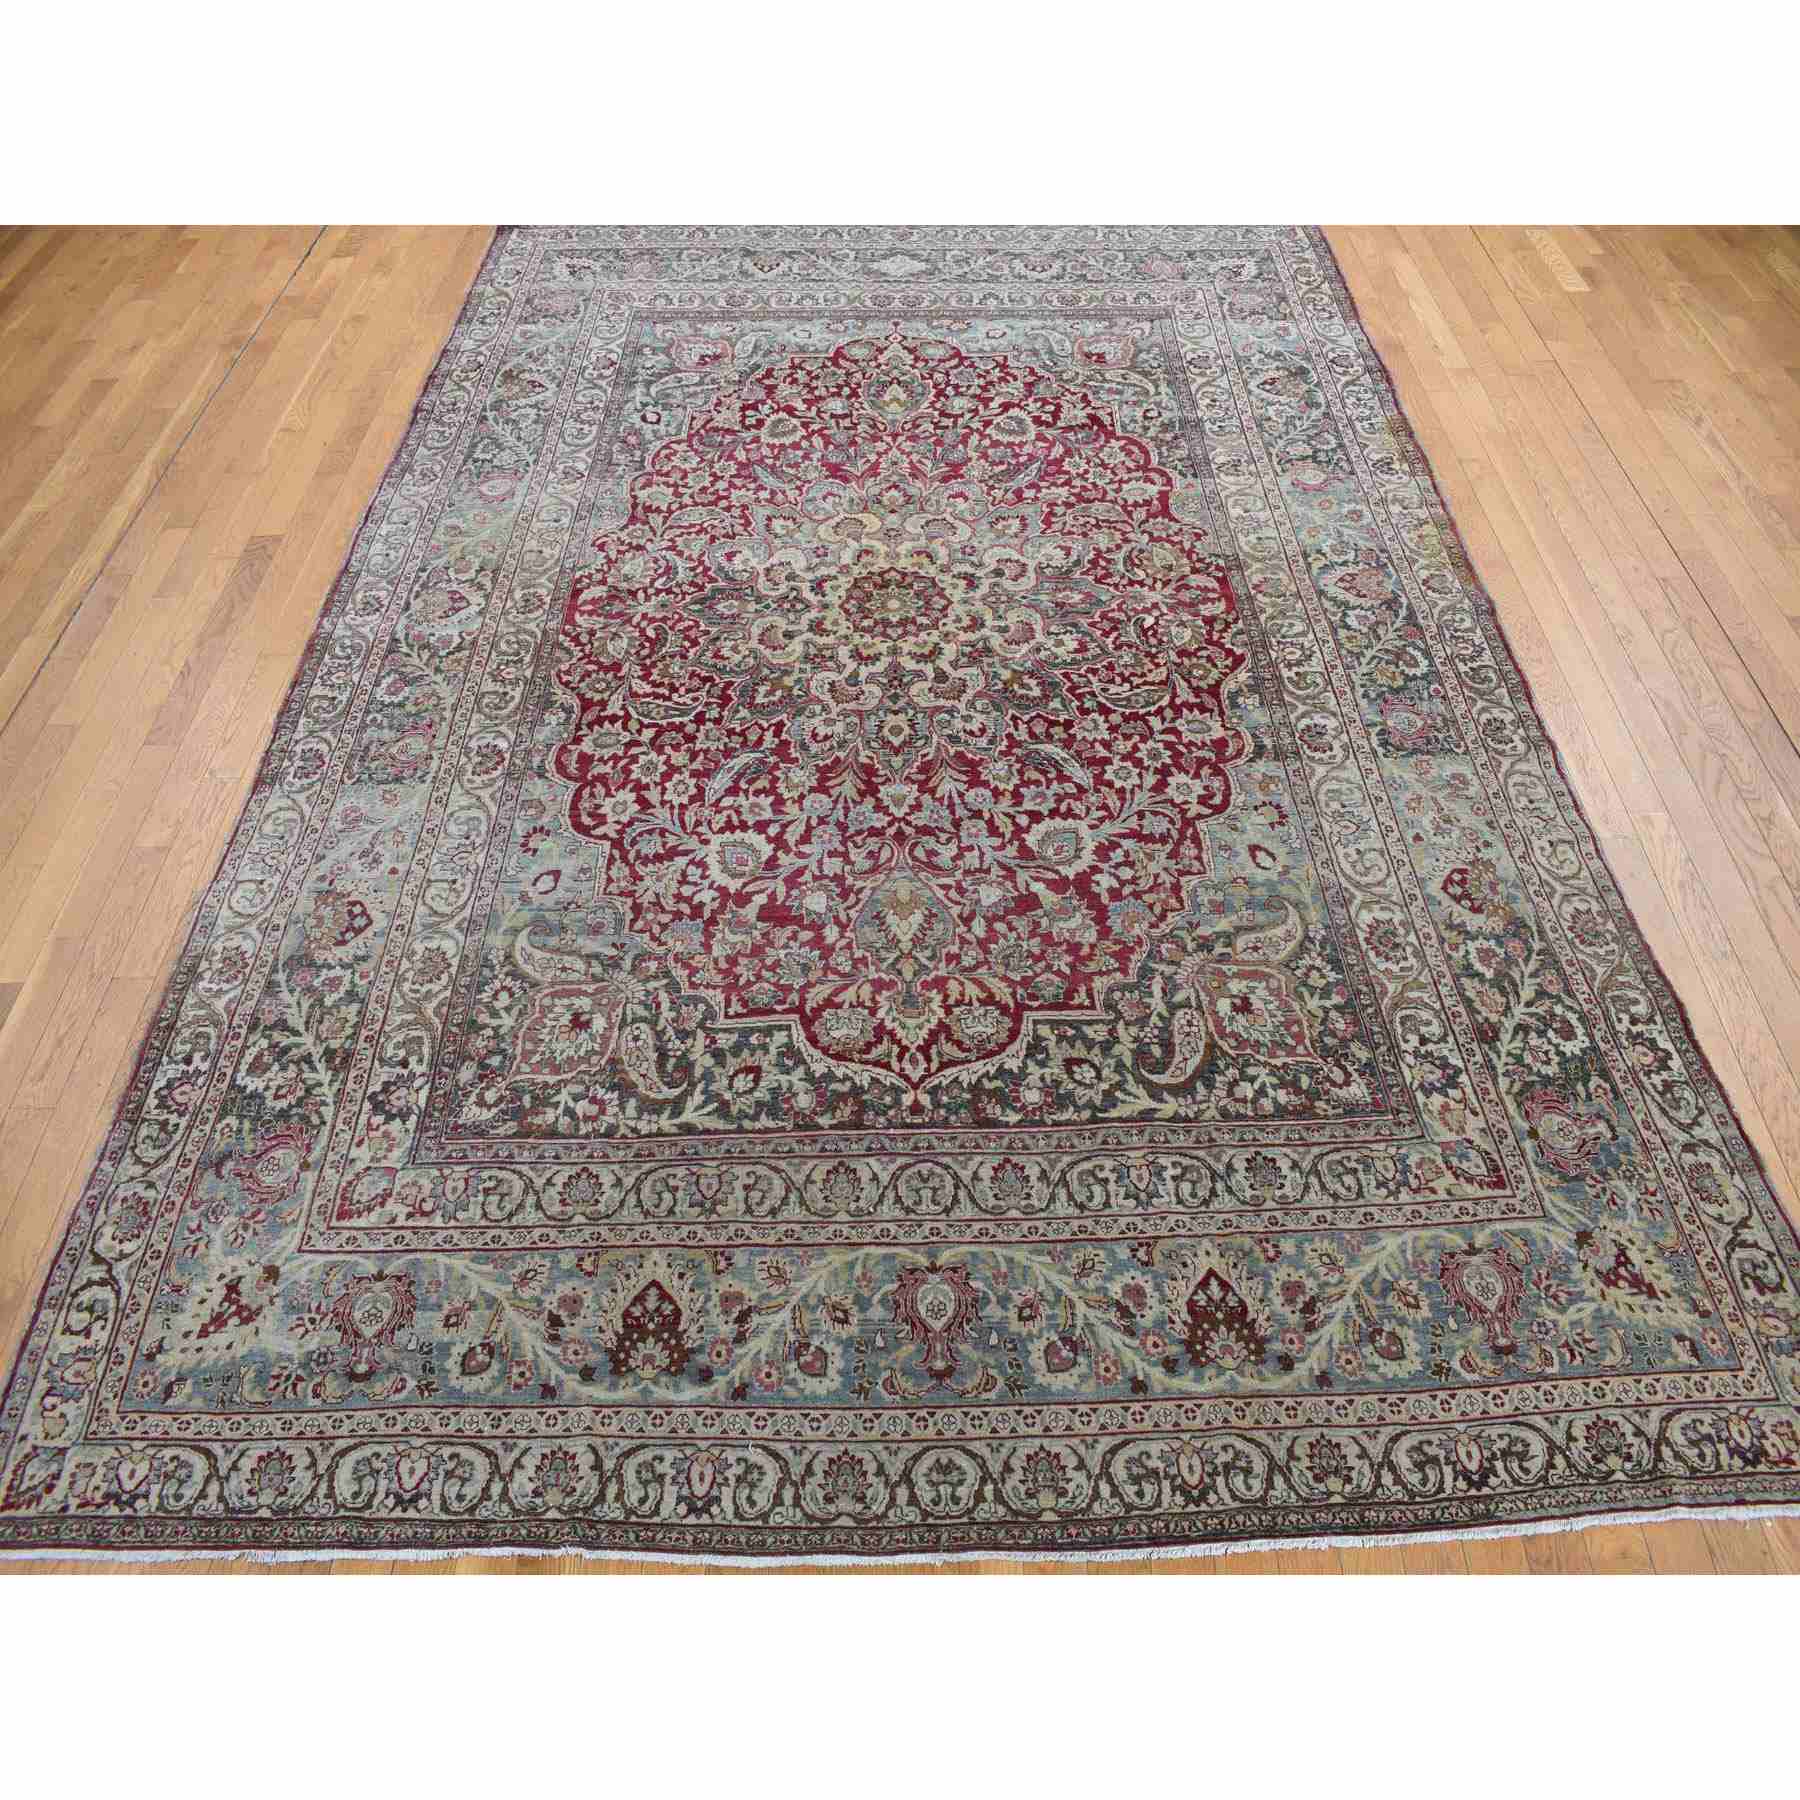 Antique-Hand-Knotted-Rug-390415